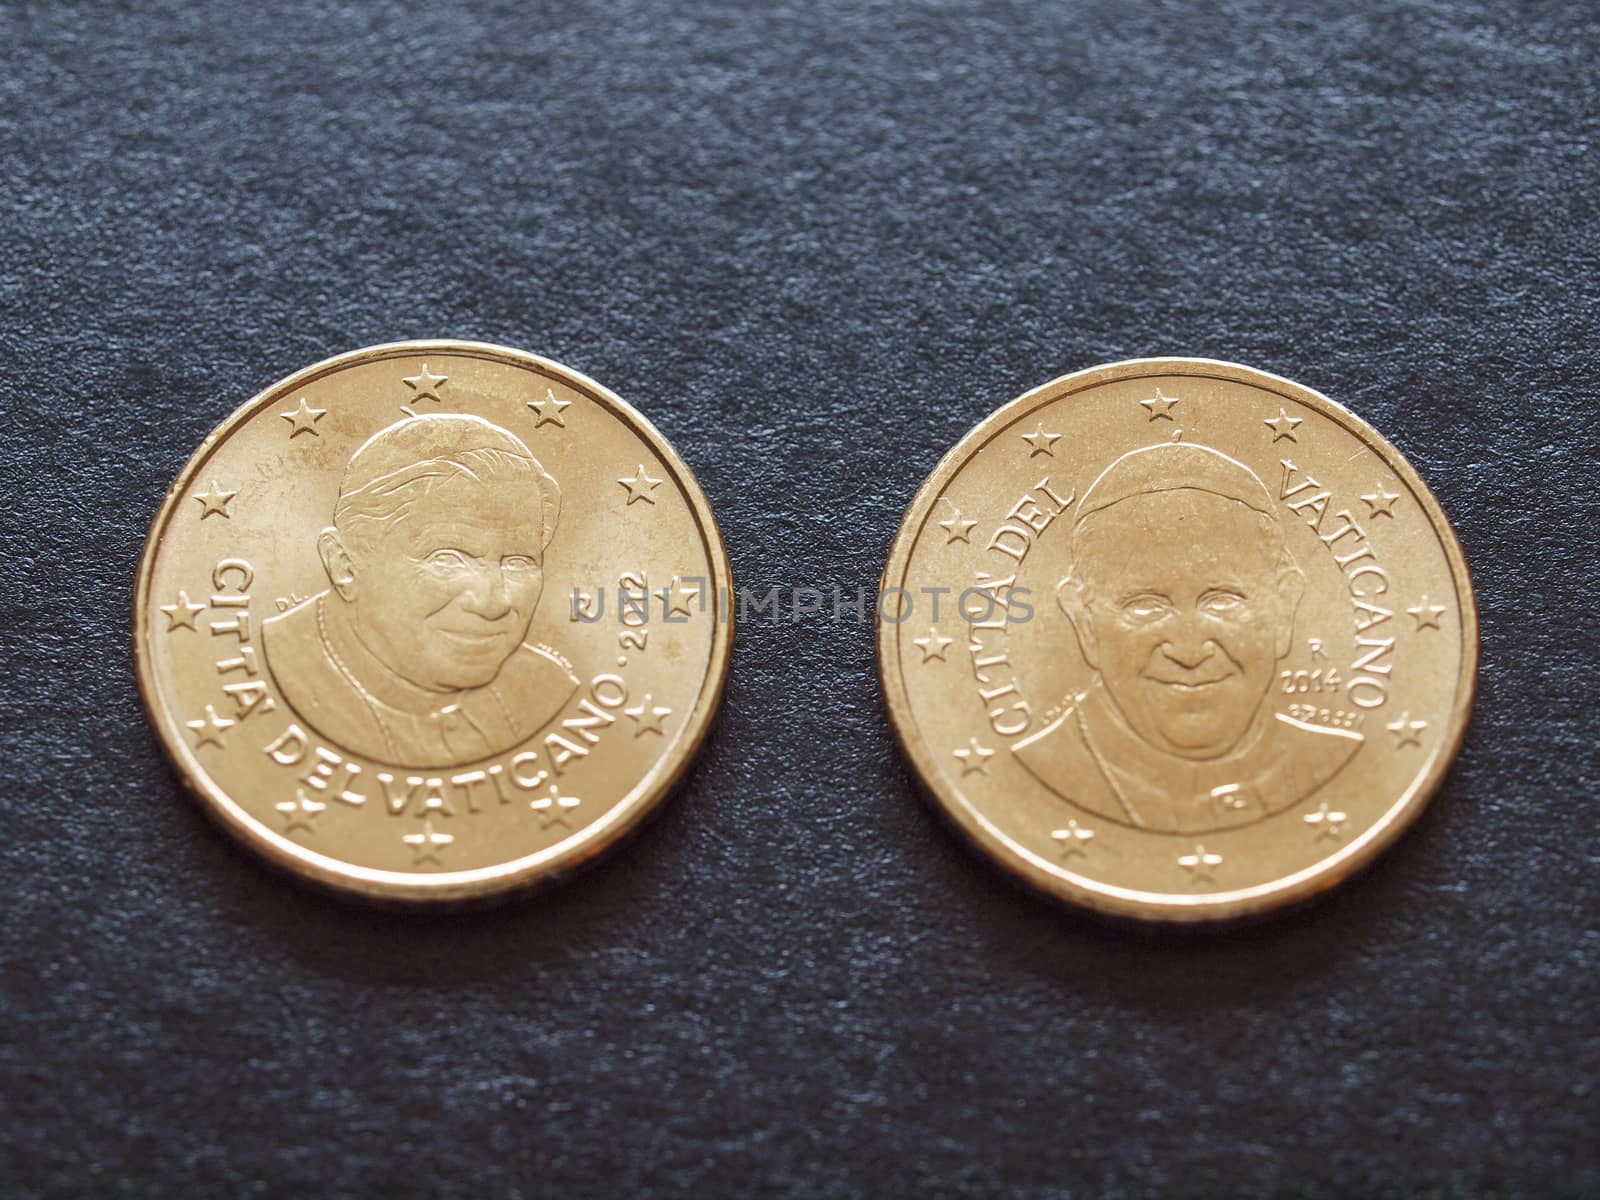 Fifty euro cent coins (EUR) bearing the portrait of Pope emeritus Benedict XVI and Pope Francis I